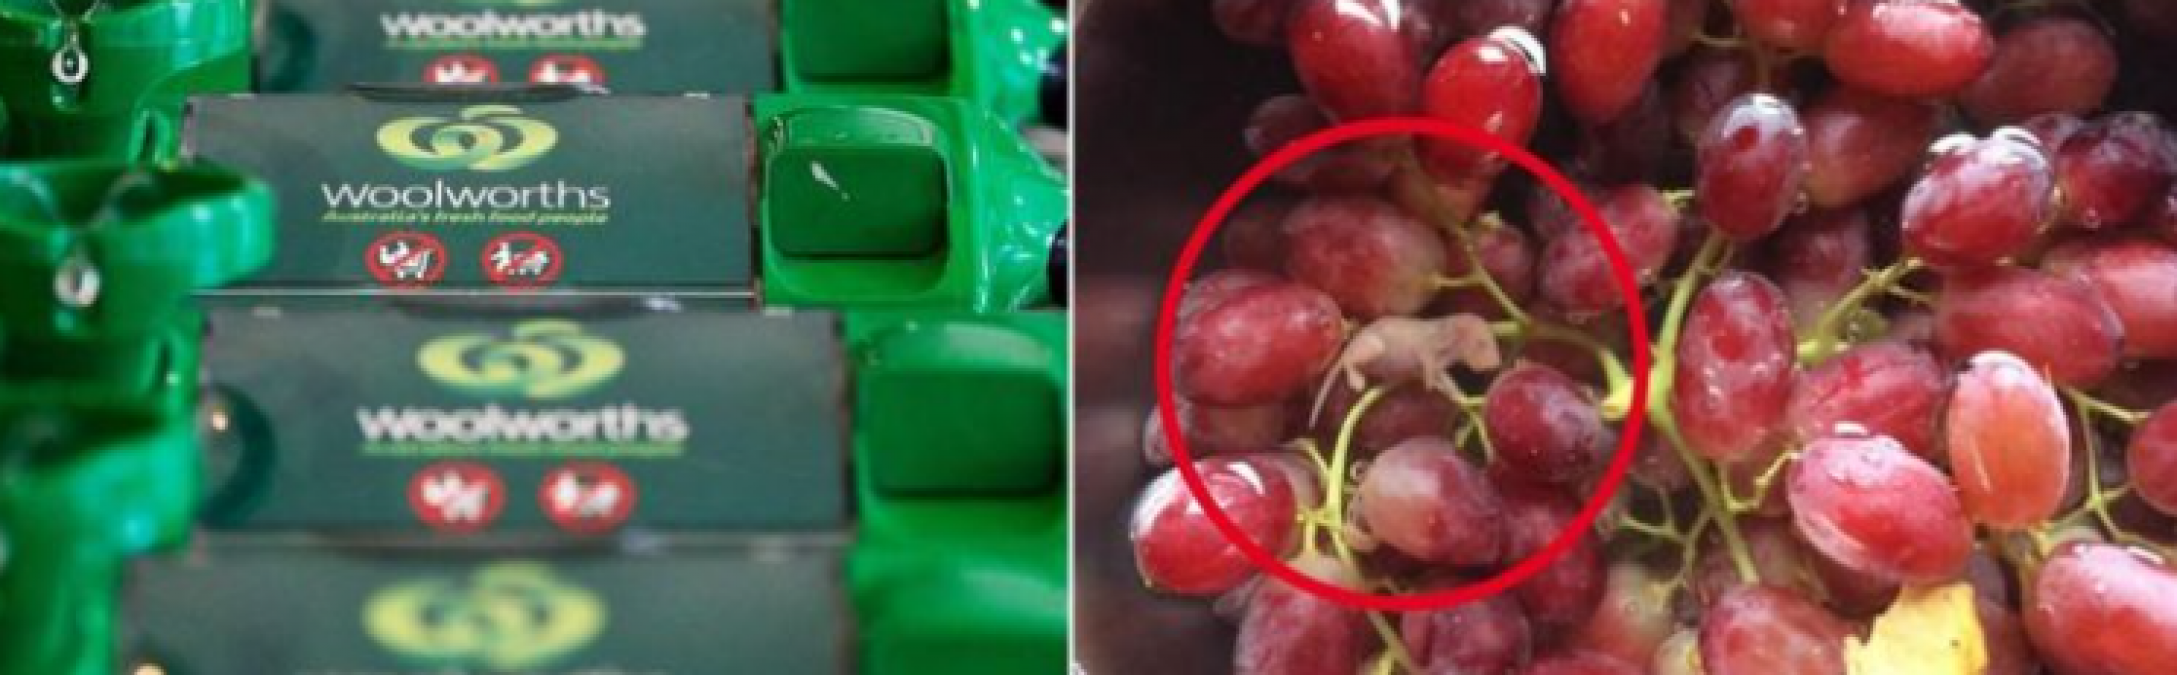 Woman finds mouse fetus in grapes packet she bought from supermarket